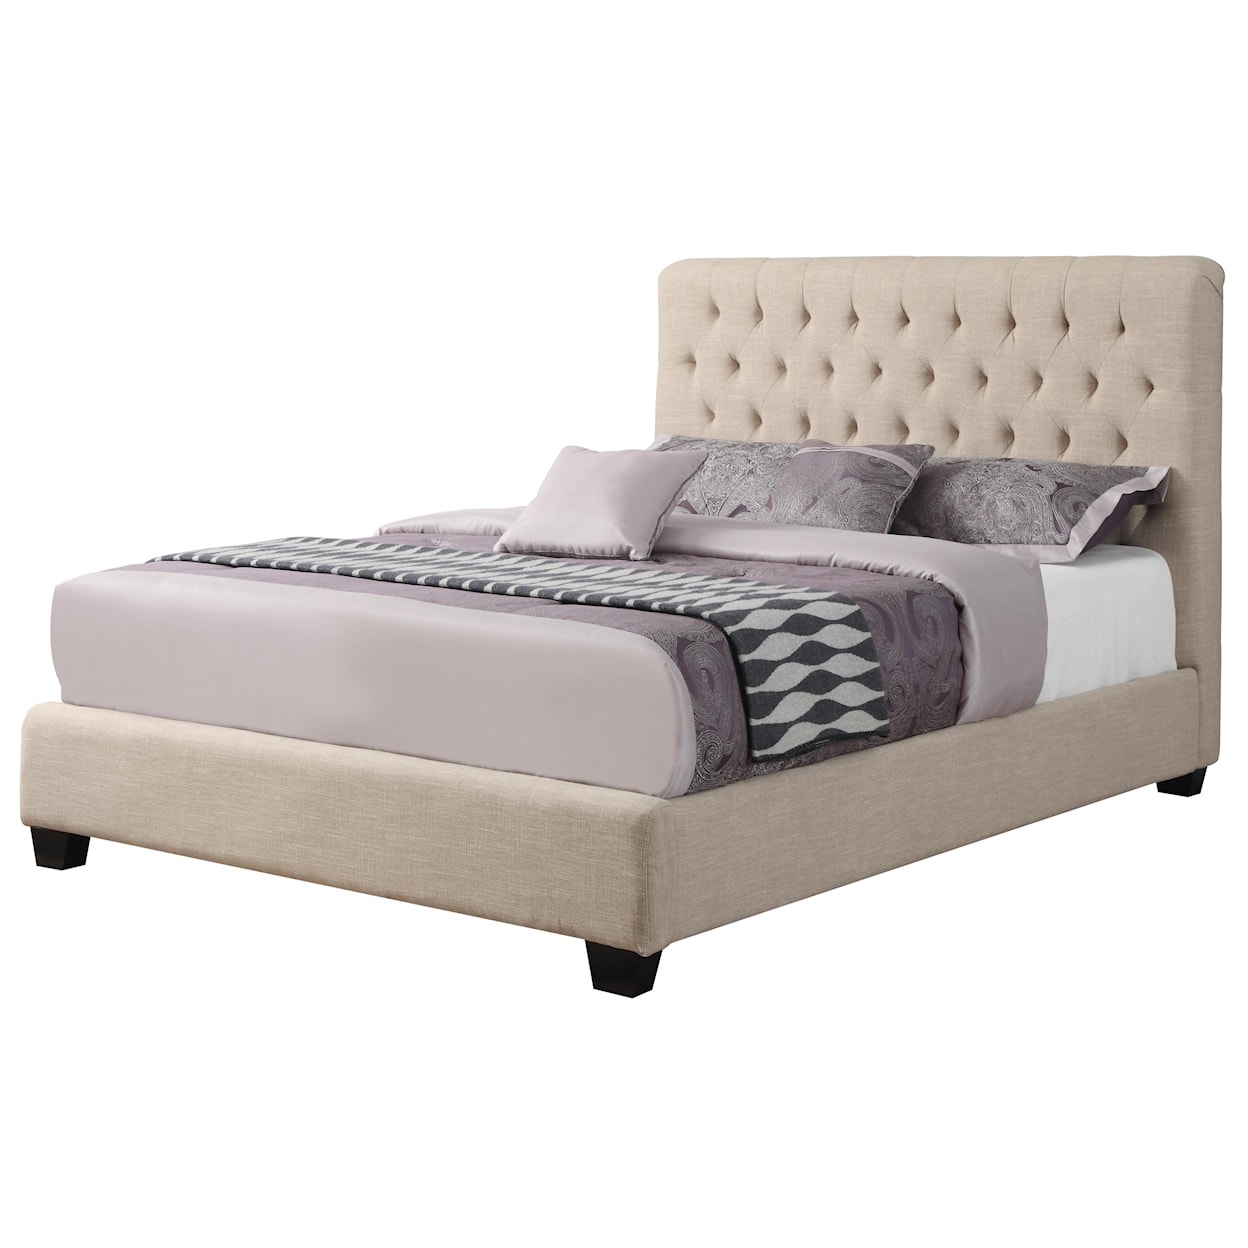 Coaster Upholstered Beds California King Chole Upholstered Bed